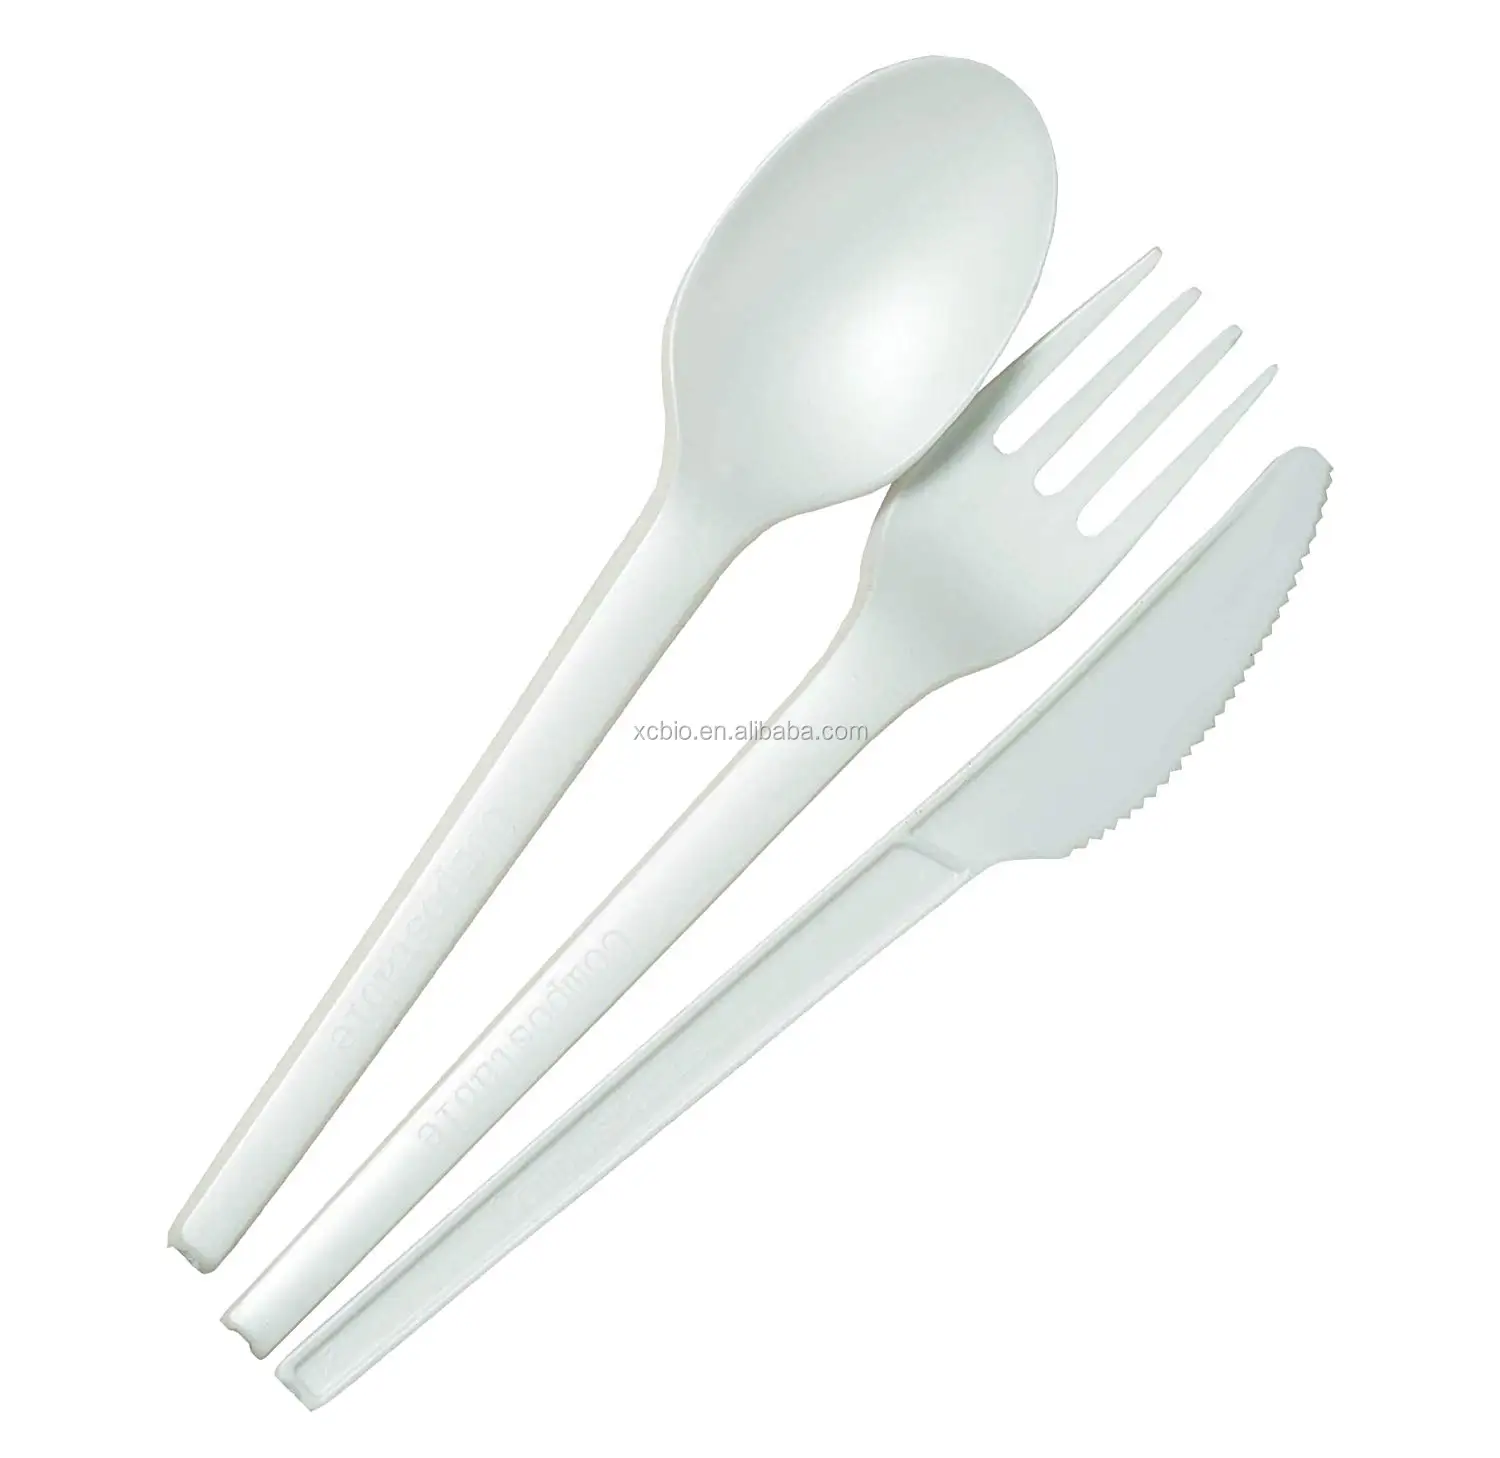 100% Compostable Forks Spoons Knives CPLA Cutlery Set Biodegradable Flatware Set Disposable Cornstarch Cutlery